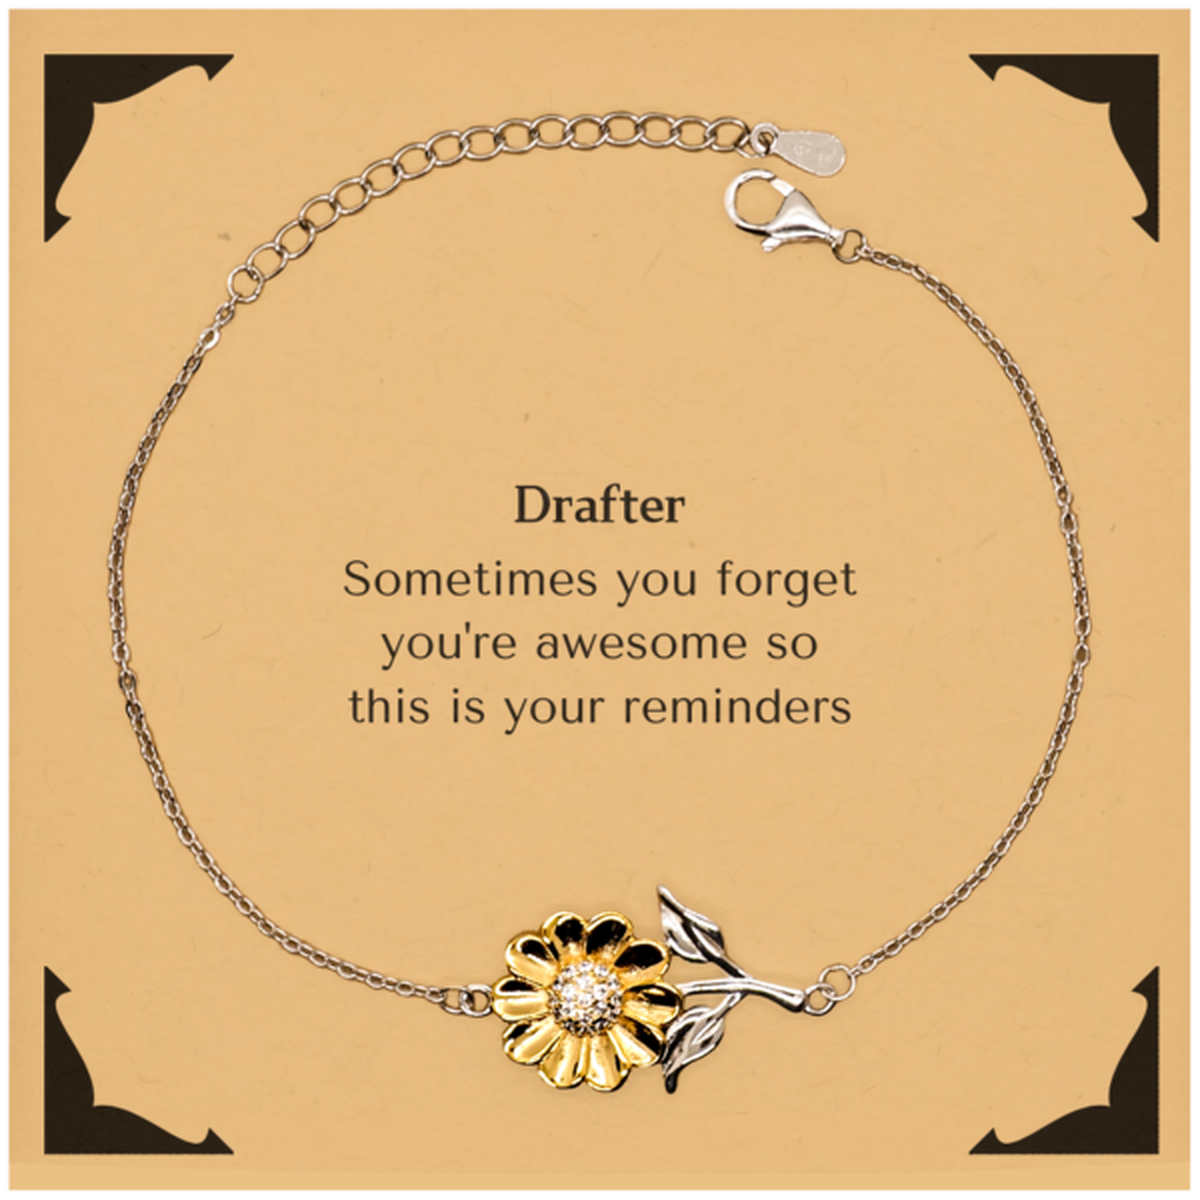 Sentimental Drafter Sunflower Bracelet, Drafter Sometimes you forget you're awesome so this is your reminders, Graduation Christmas Birthday Gifts for Drafter, Men, Women, Coworkers